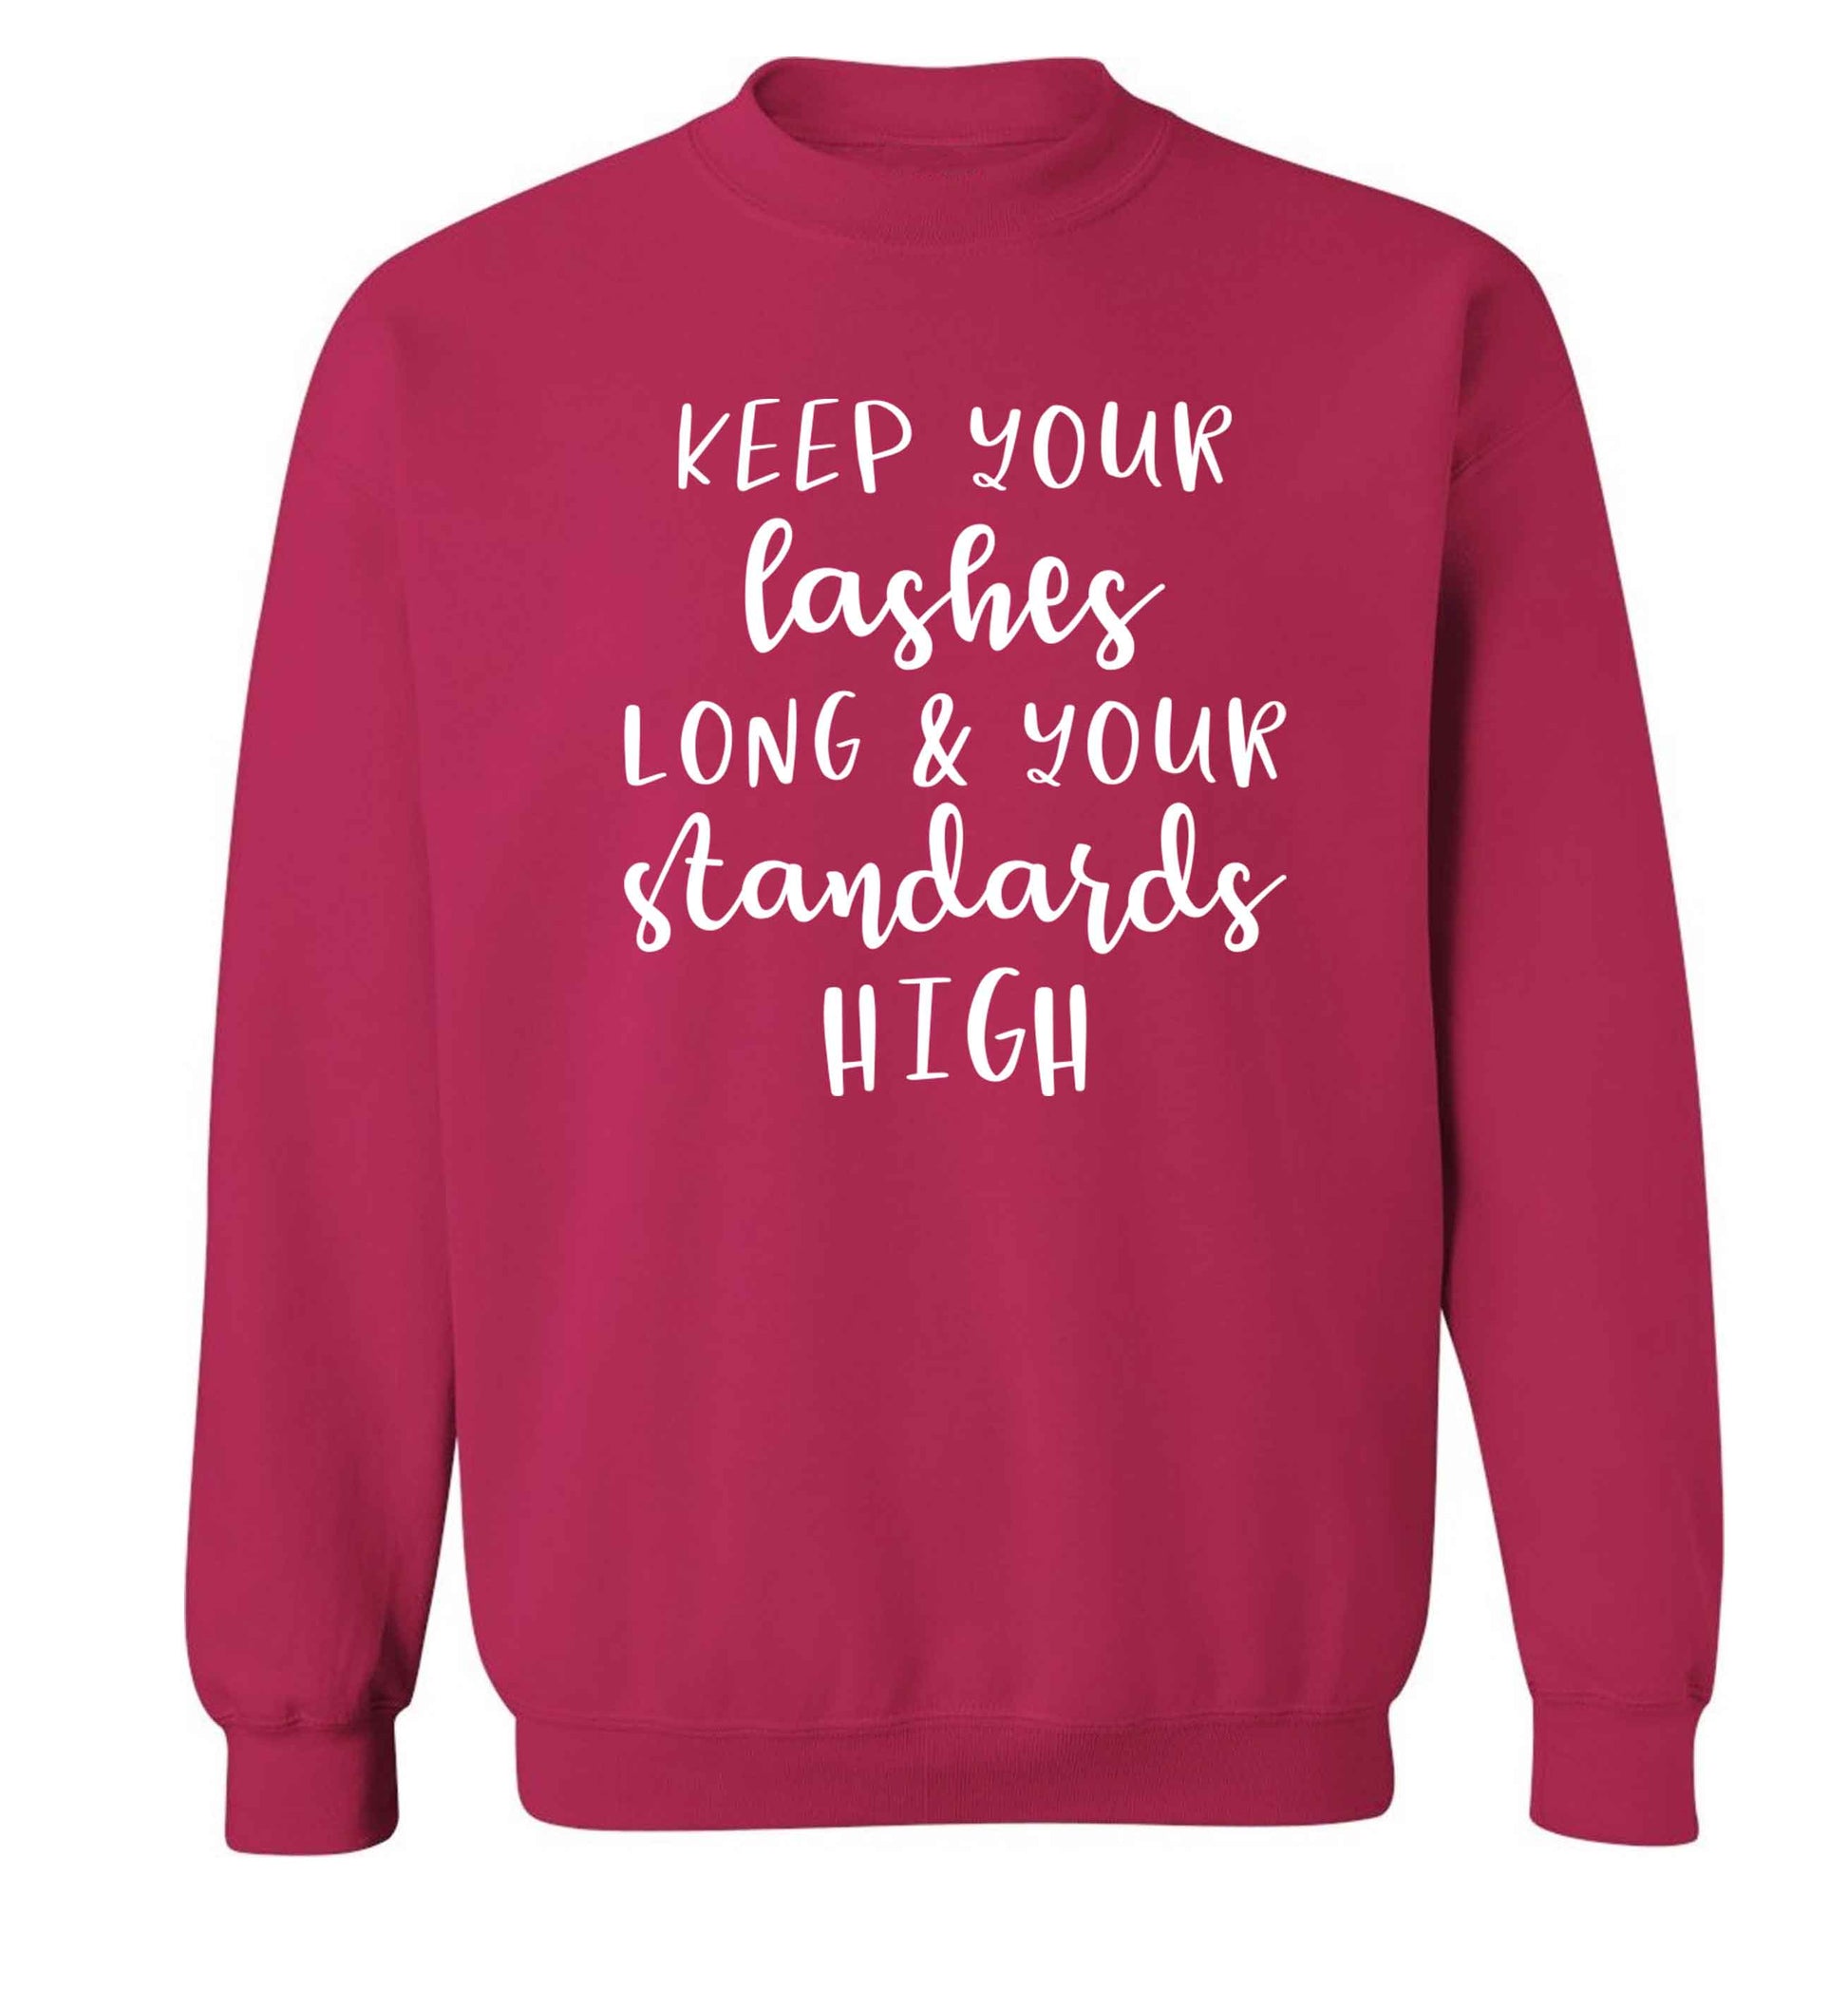 Keep your lashes long and your standards high Adult's unisex pink Sweater 2XL